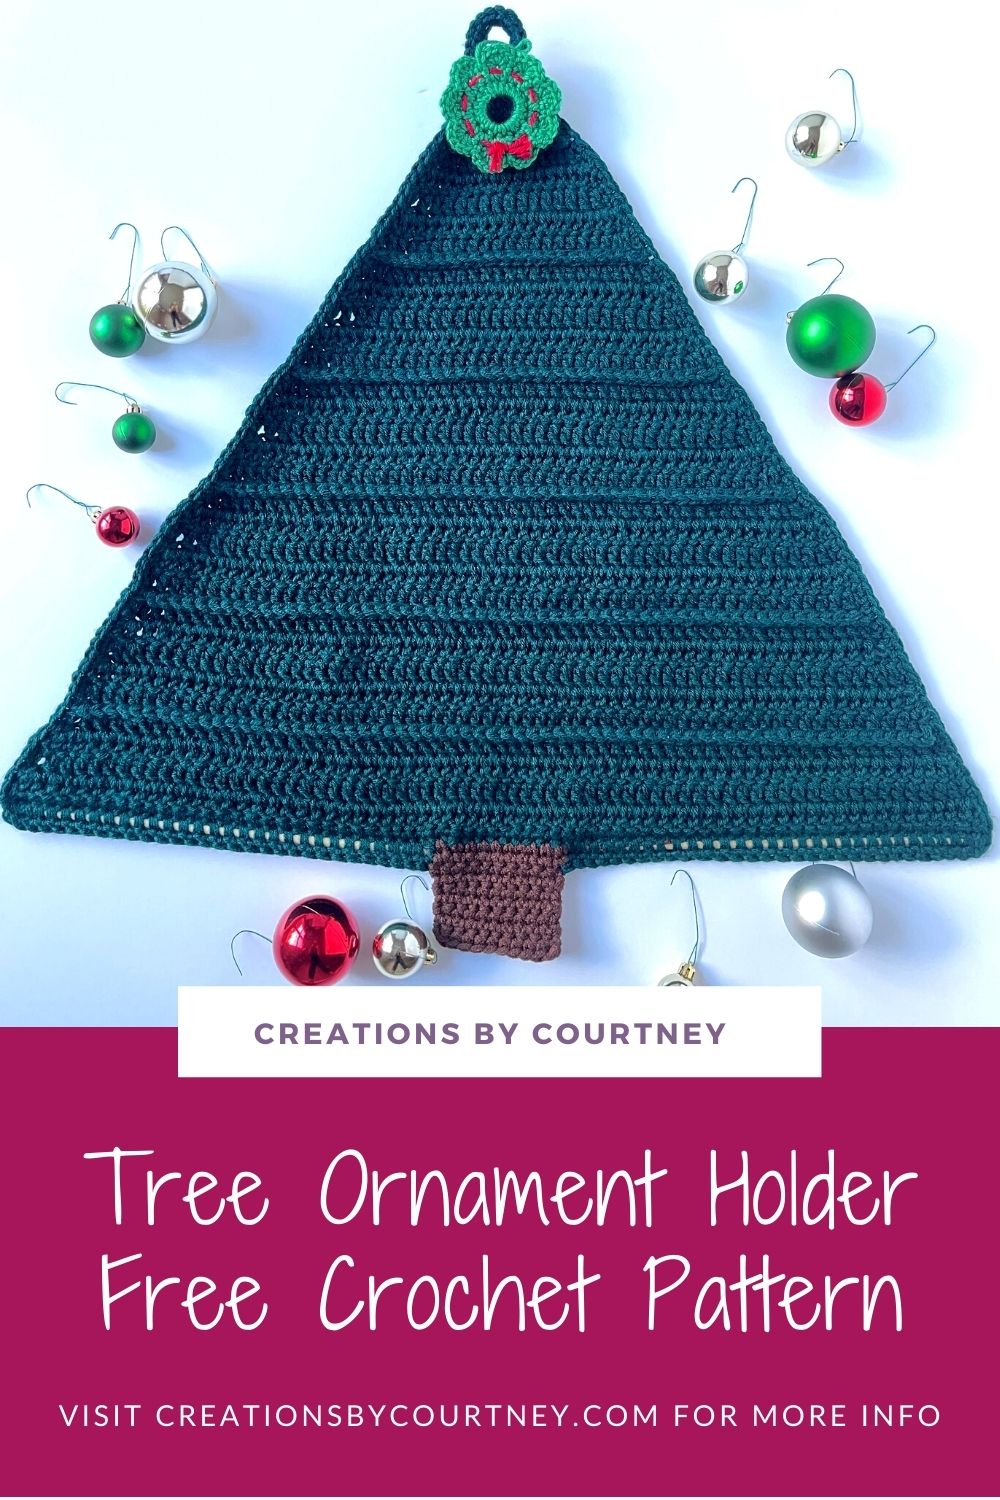 The Tree Ornament Holder is a quick, free crochet pattern perfect for stash busting and decorating for the holidays. Grab two strands of worsted weight or a bulky weight to make this crochet pattern in 3-5 days. #creationsbycourtney